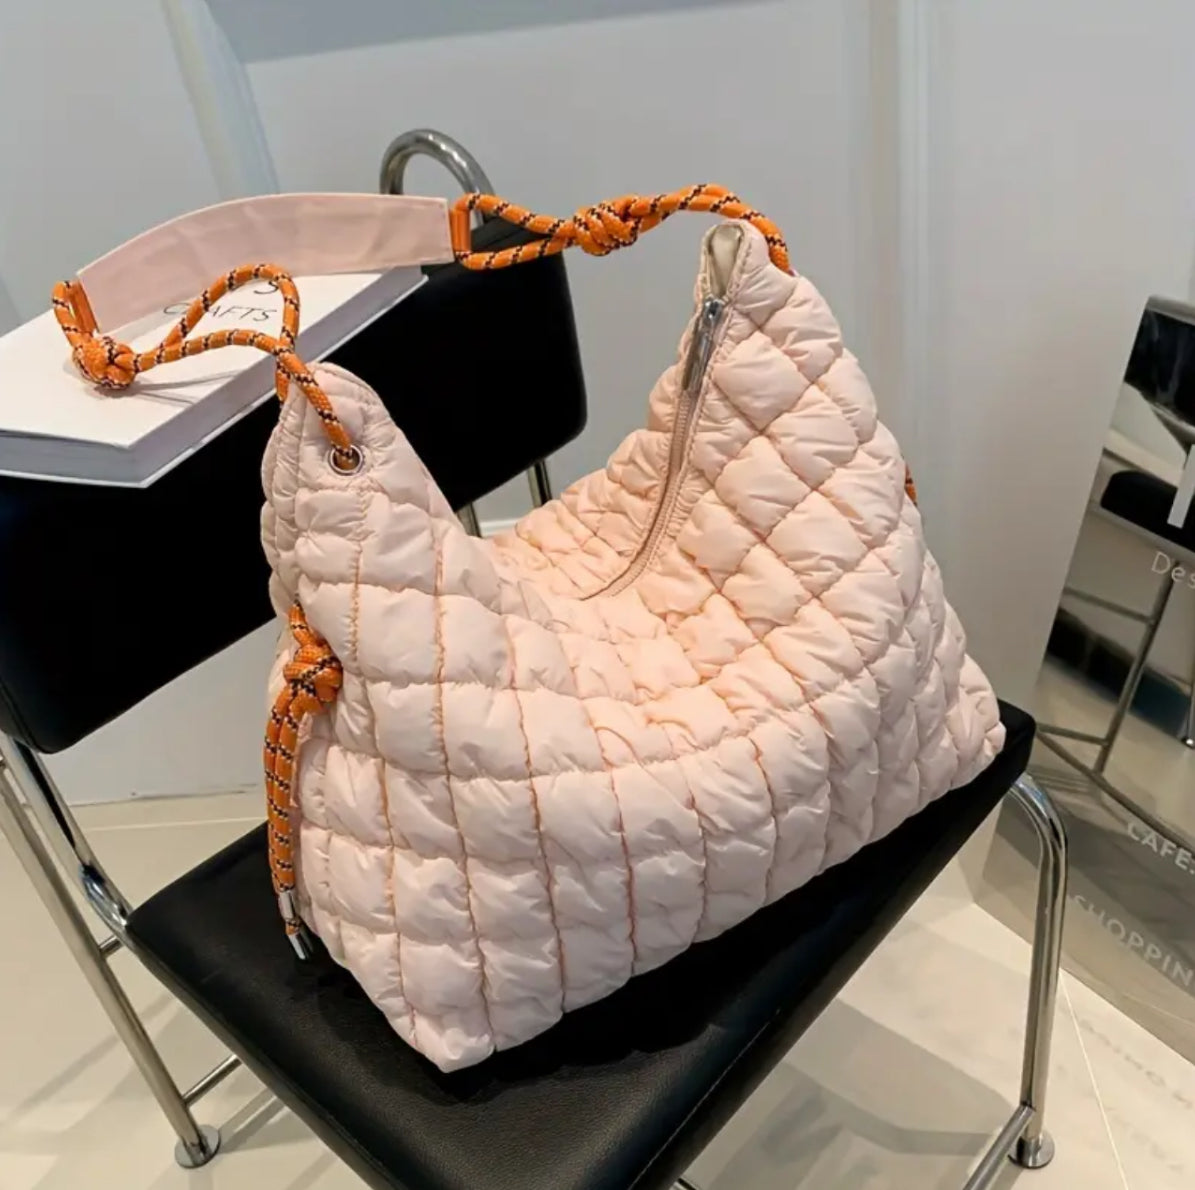 In Motion Quilted Bag (4 colors)